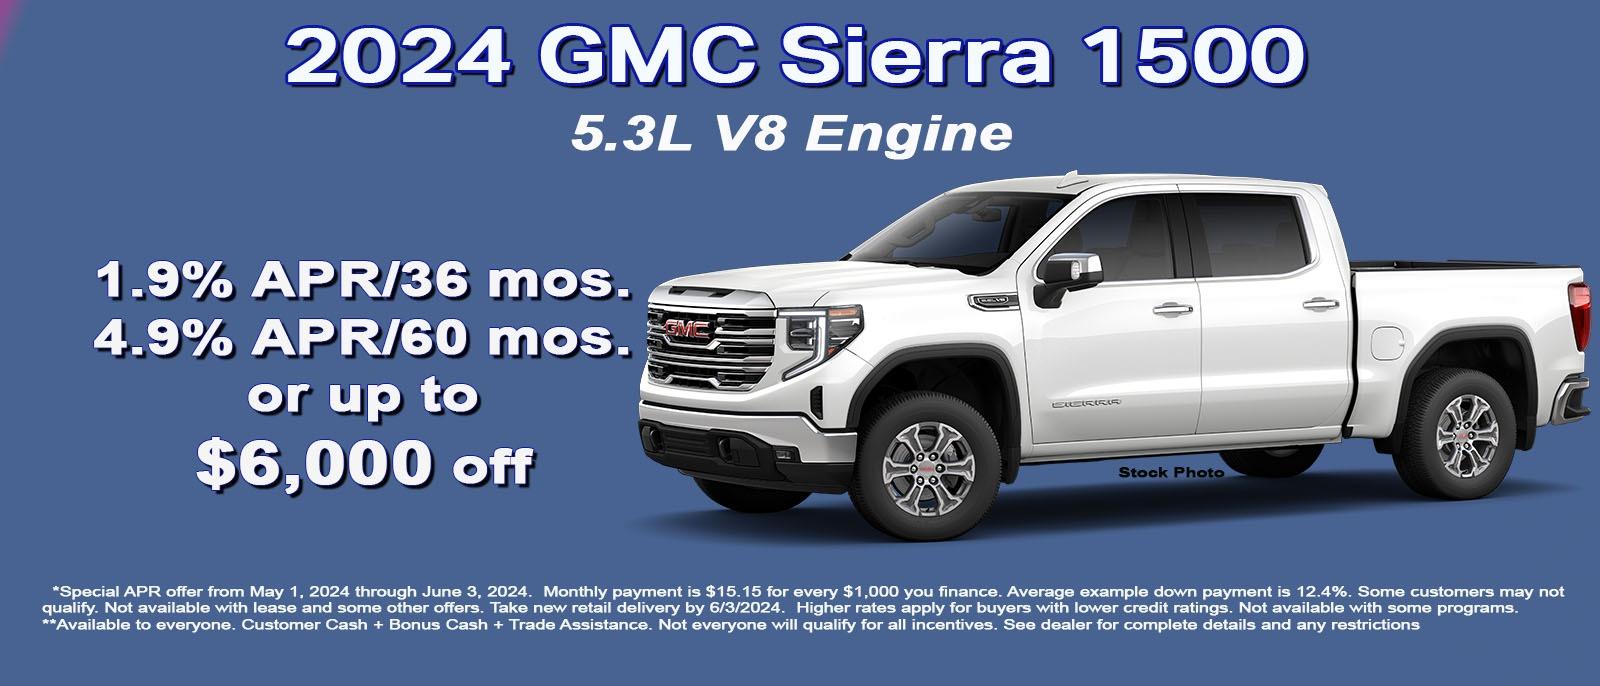 Save up to $6,000 on your new GMC Sierra